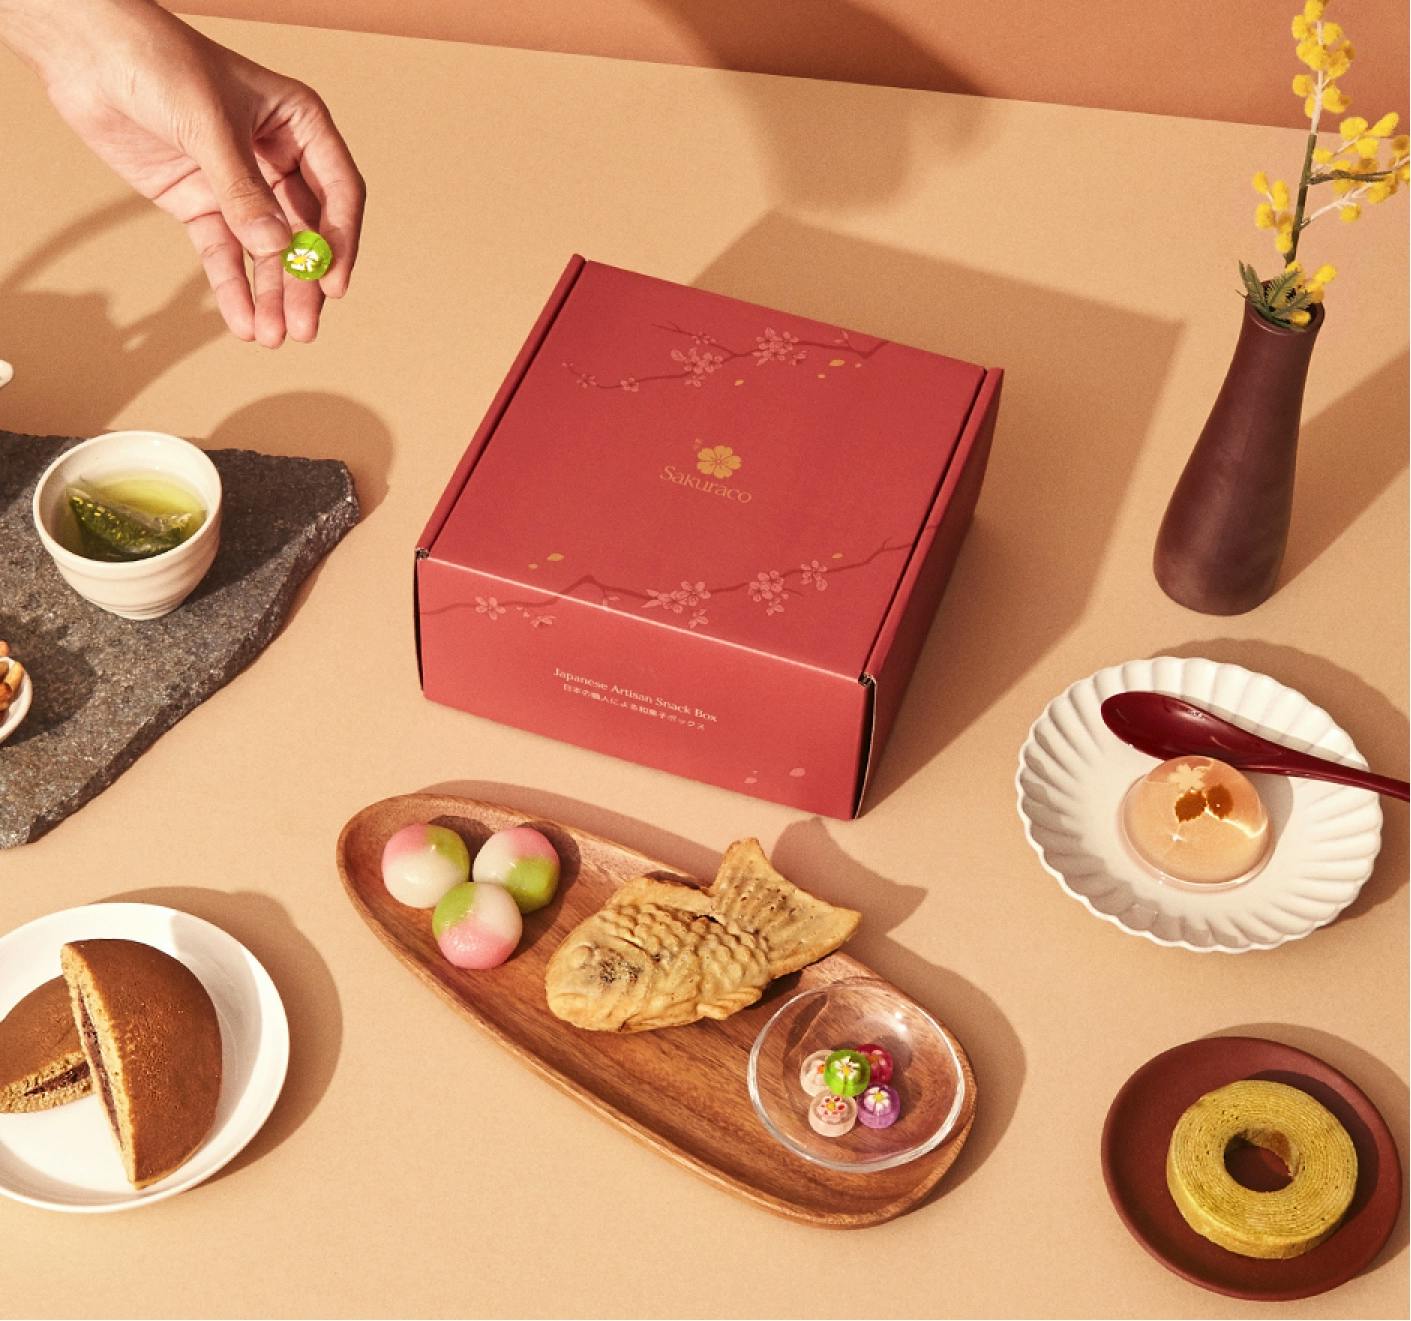 A Sakuraco snack box surrounded by delectable traditional snacks